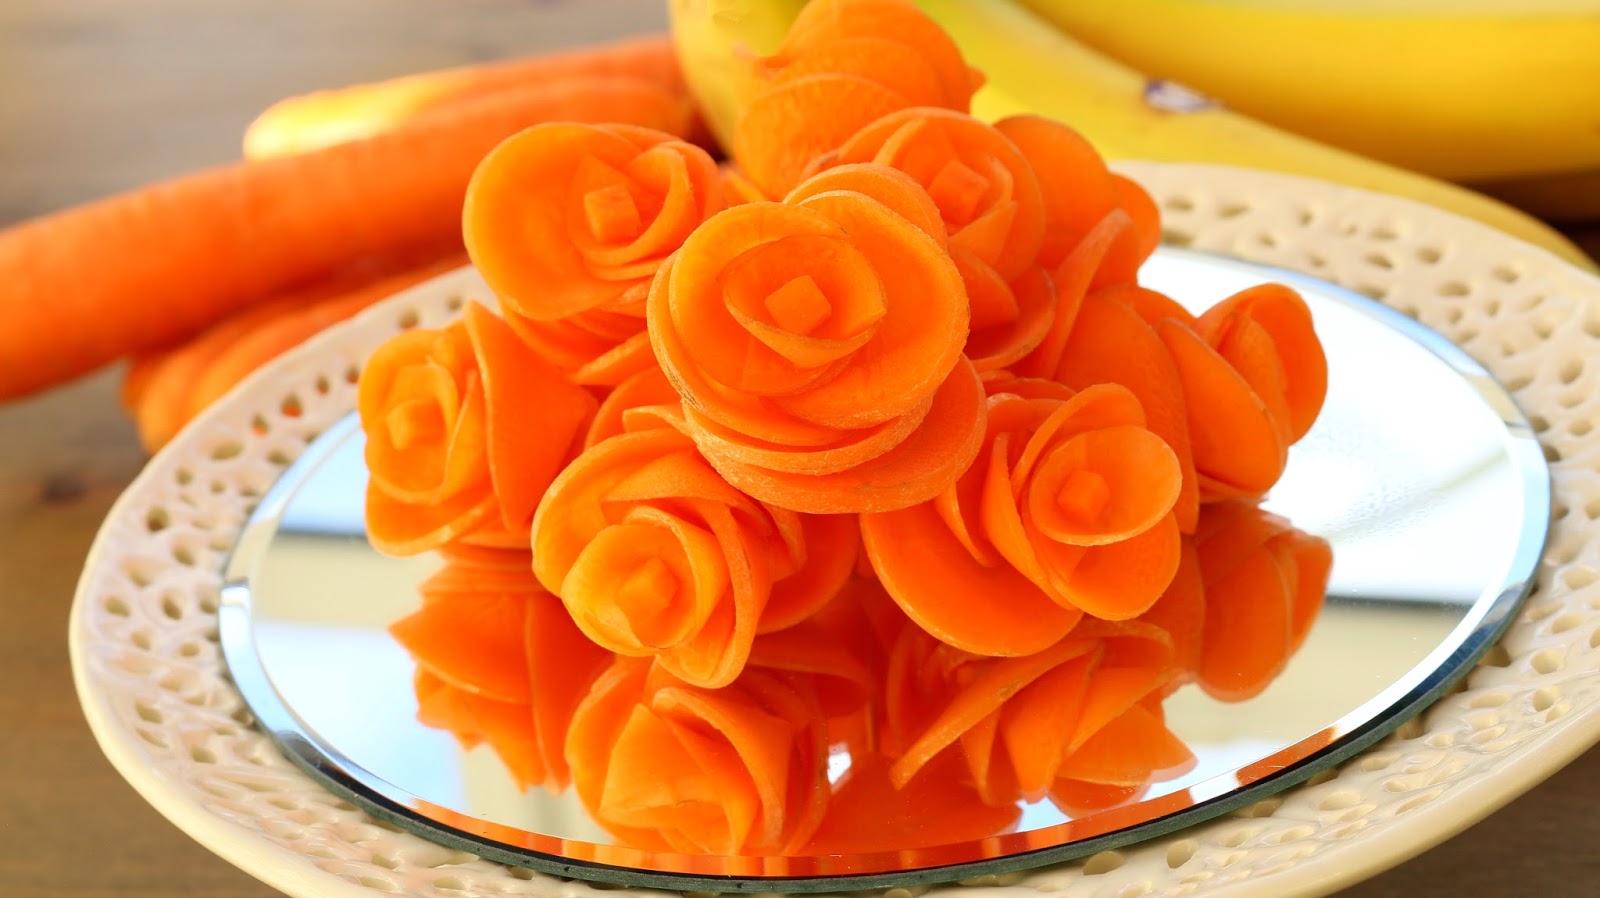 Josephine's Recipes: How to Make Carrot Flowers - Vegetable Carving Garnish - Sushi ...